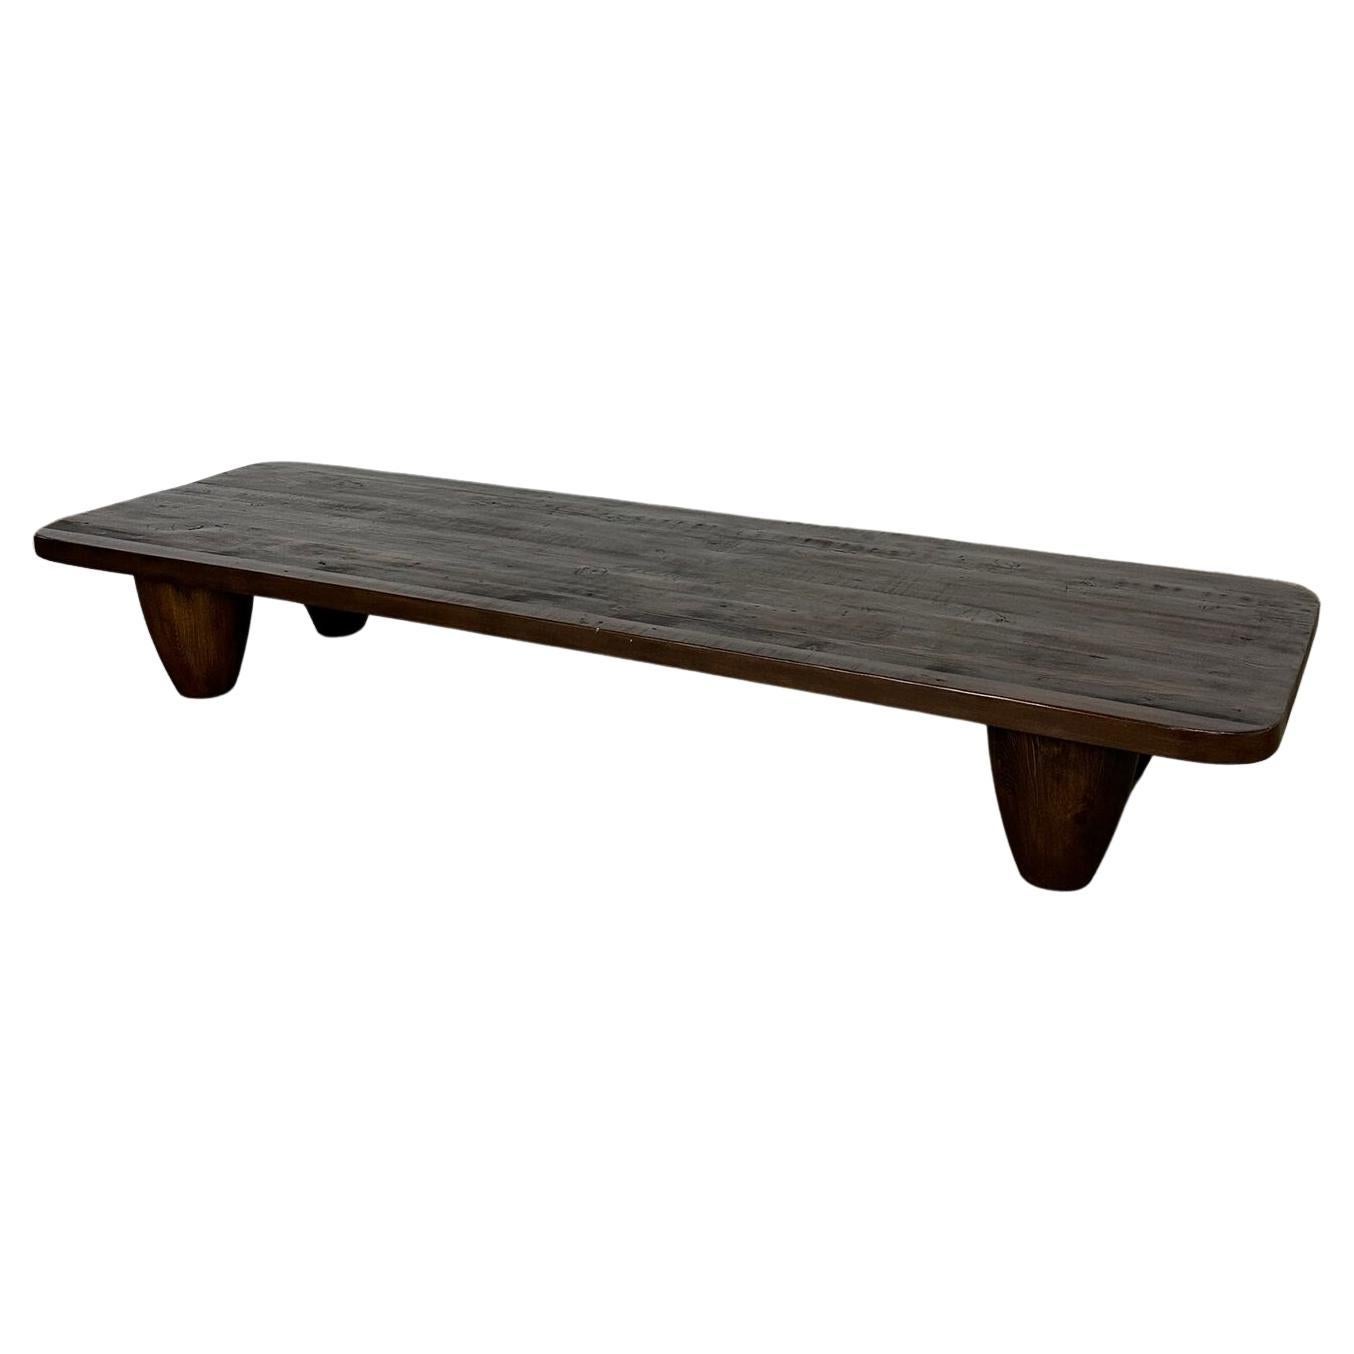 “Theo” Primitive Coffee Table by Six Penny- Ebony Stain